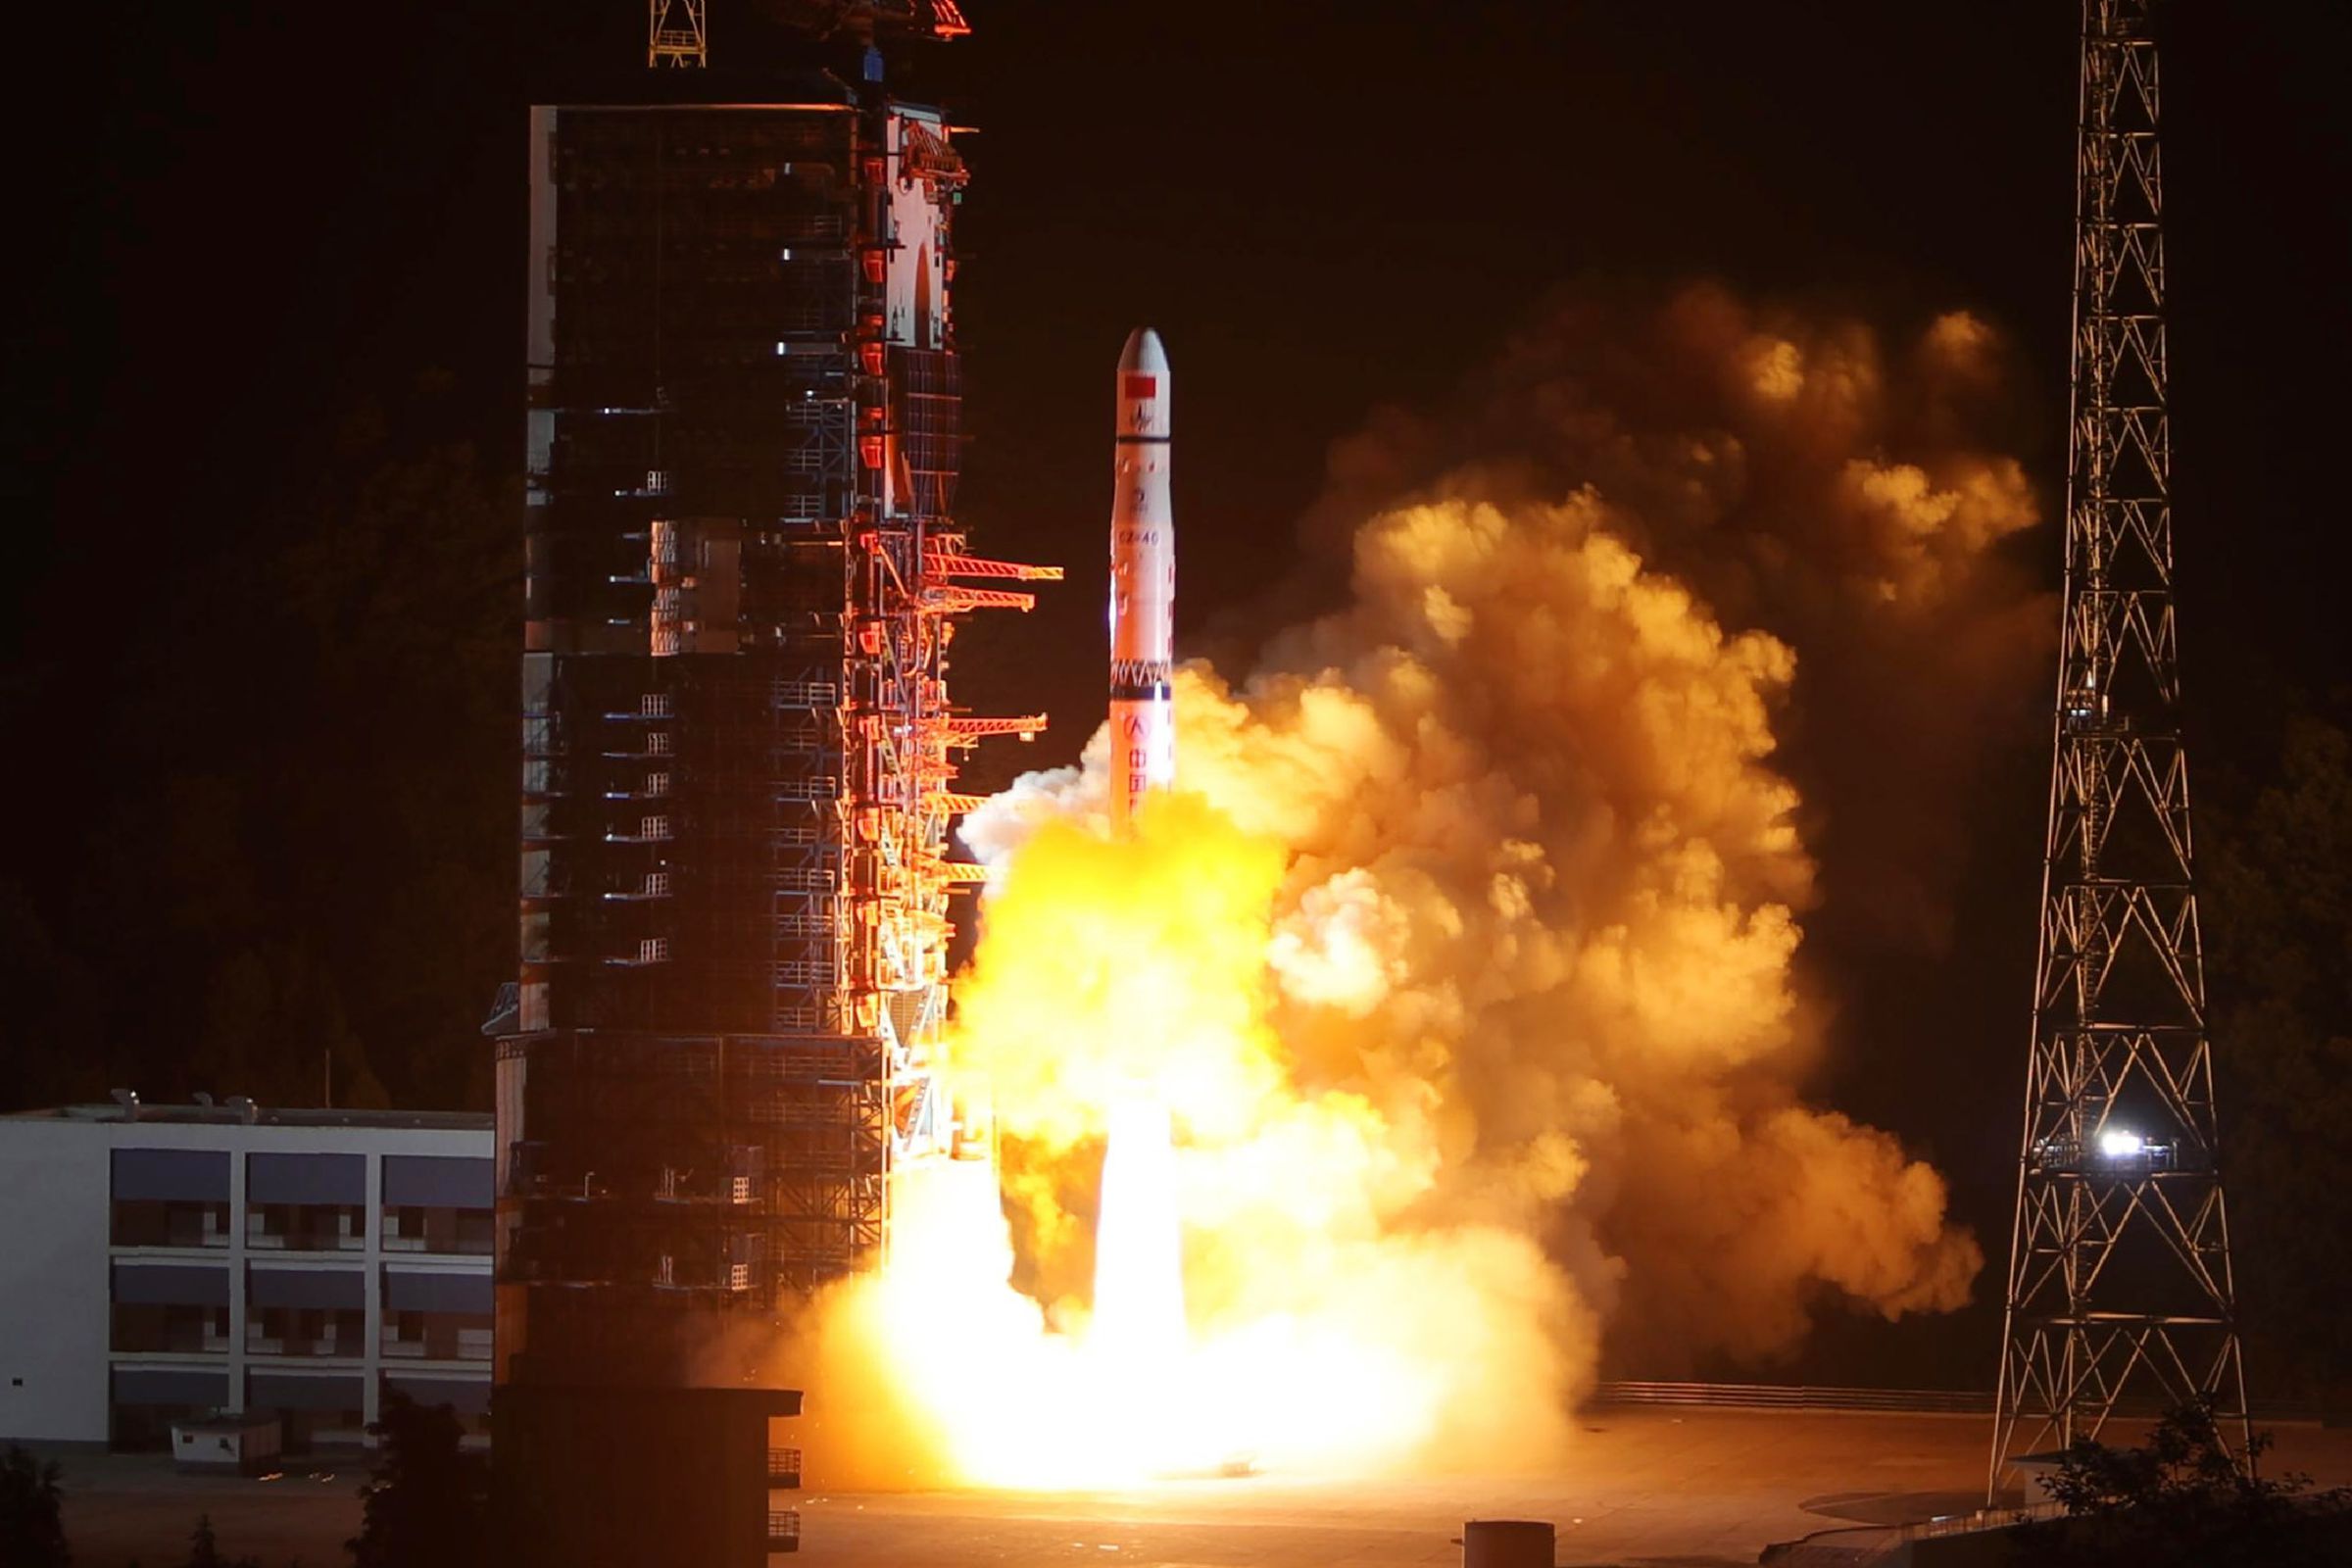 A Long March-4C rocket lifts off from the southwestern Xichang launch center carrying the Queqiao (“Magpie Bridge”) satellite in Xichang, China’s southwestern Sichuan province on May 21st, 2018.